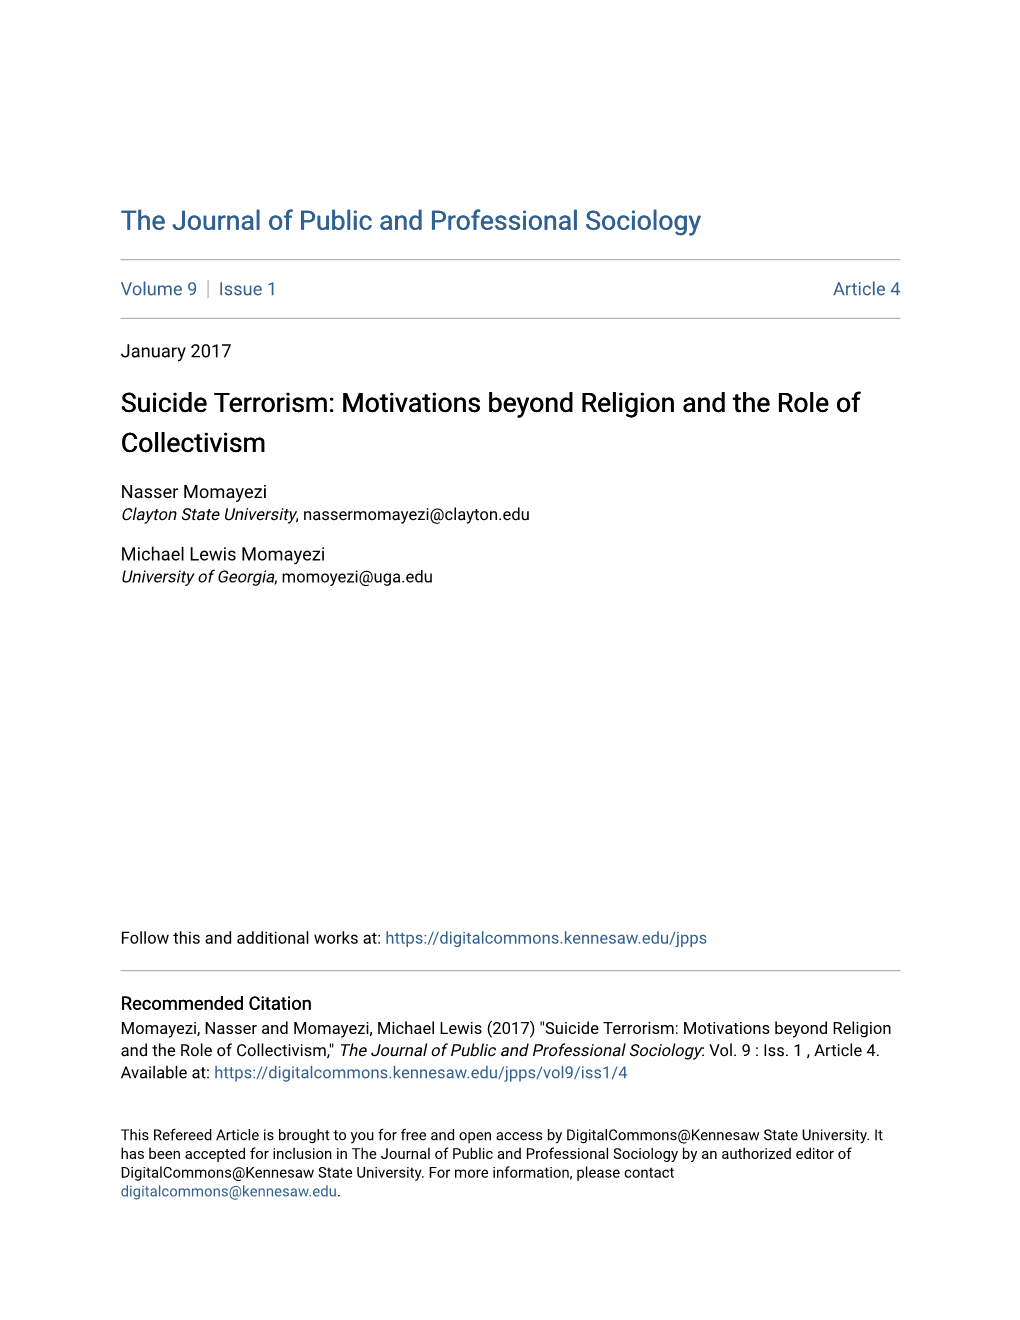 Suicide Terrorism: Motivations Beyond Religion and the Role of Collectivism